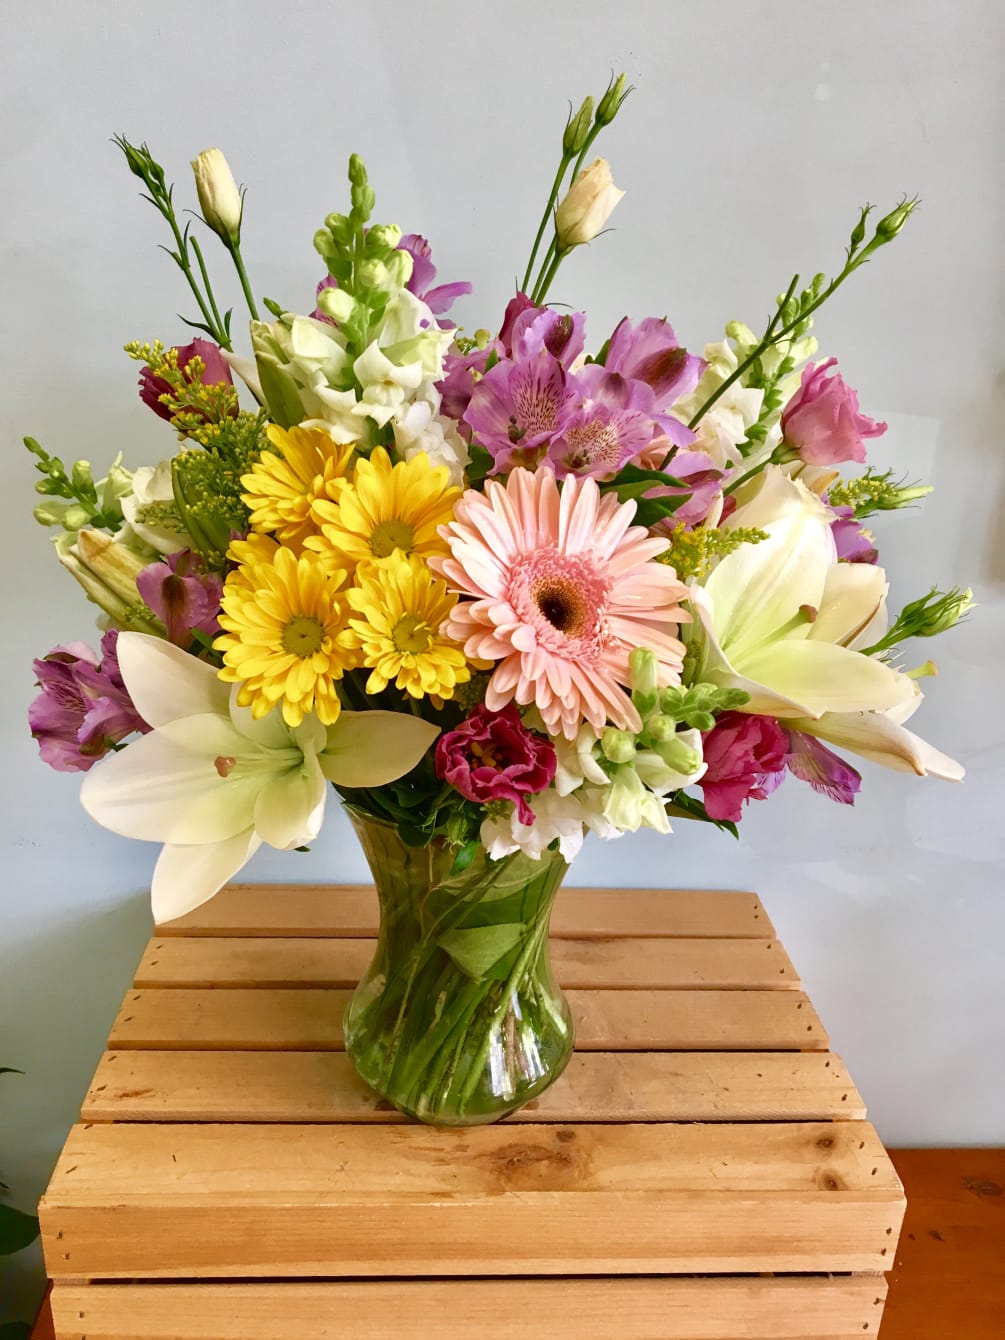 These beautiful pastel flowers are a perfect way to celebrate Spring!